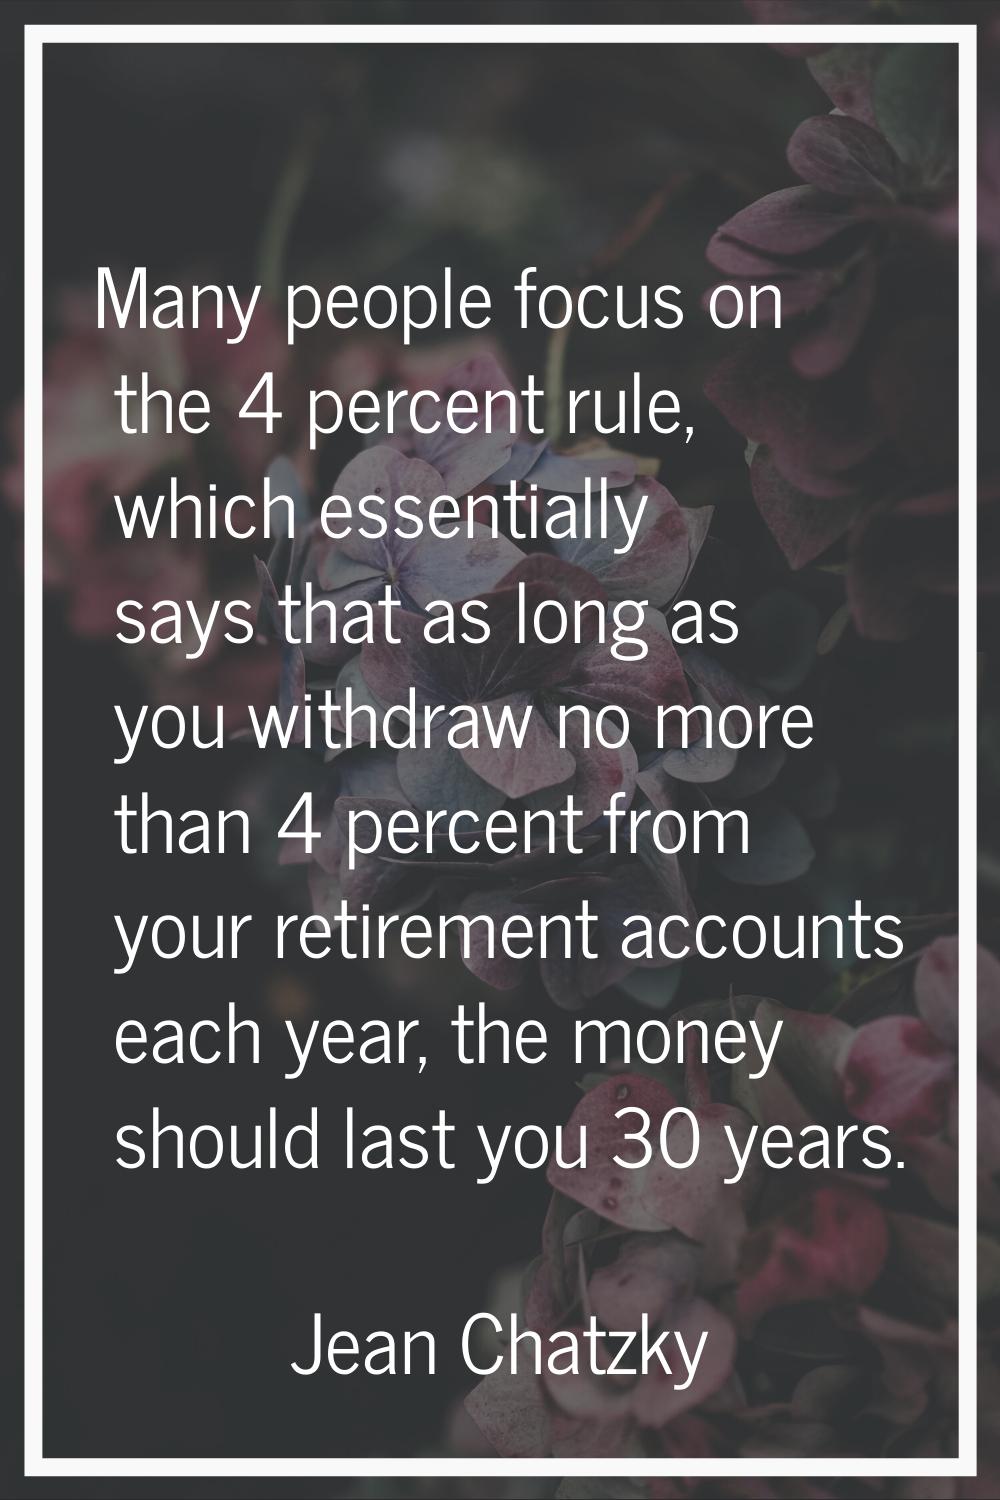 Many people focus on the 4 percent rule, which essentially says that as long as you withdraw no mor